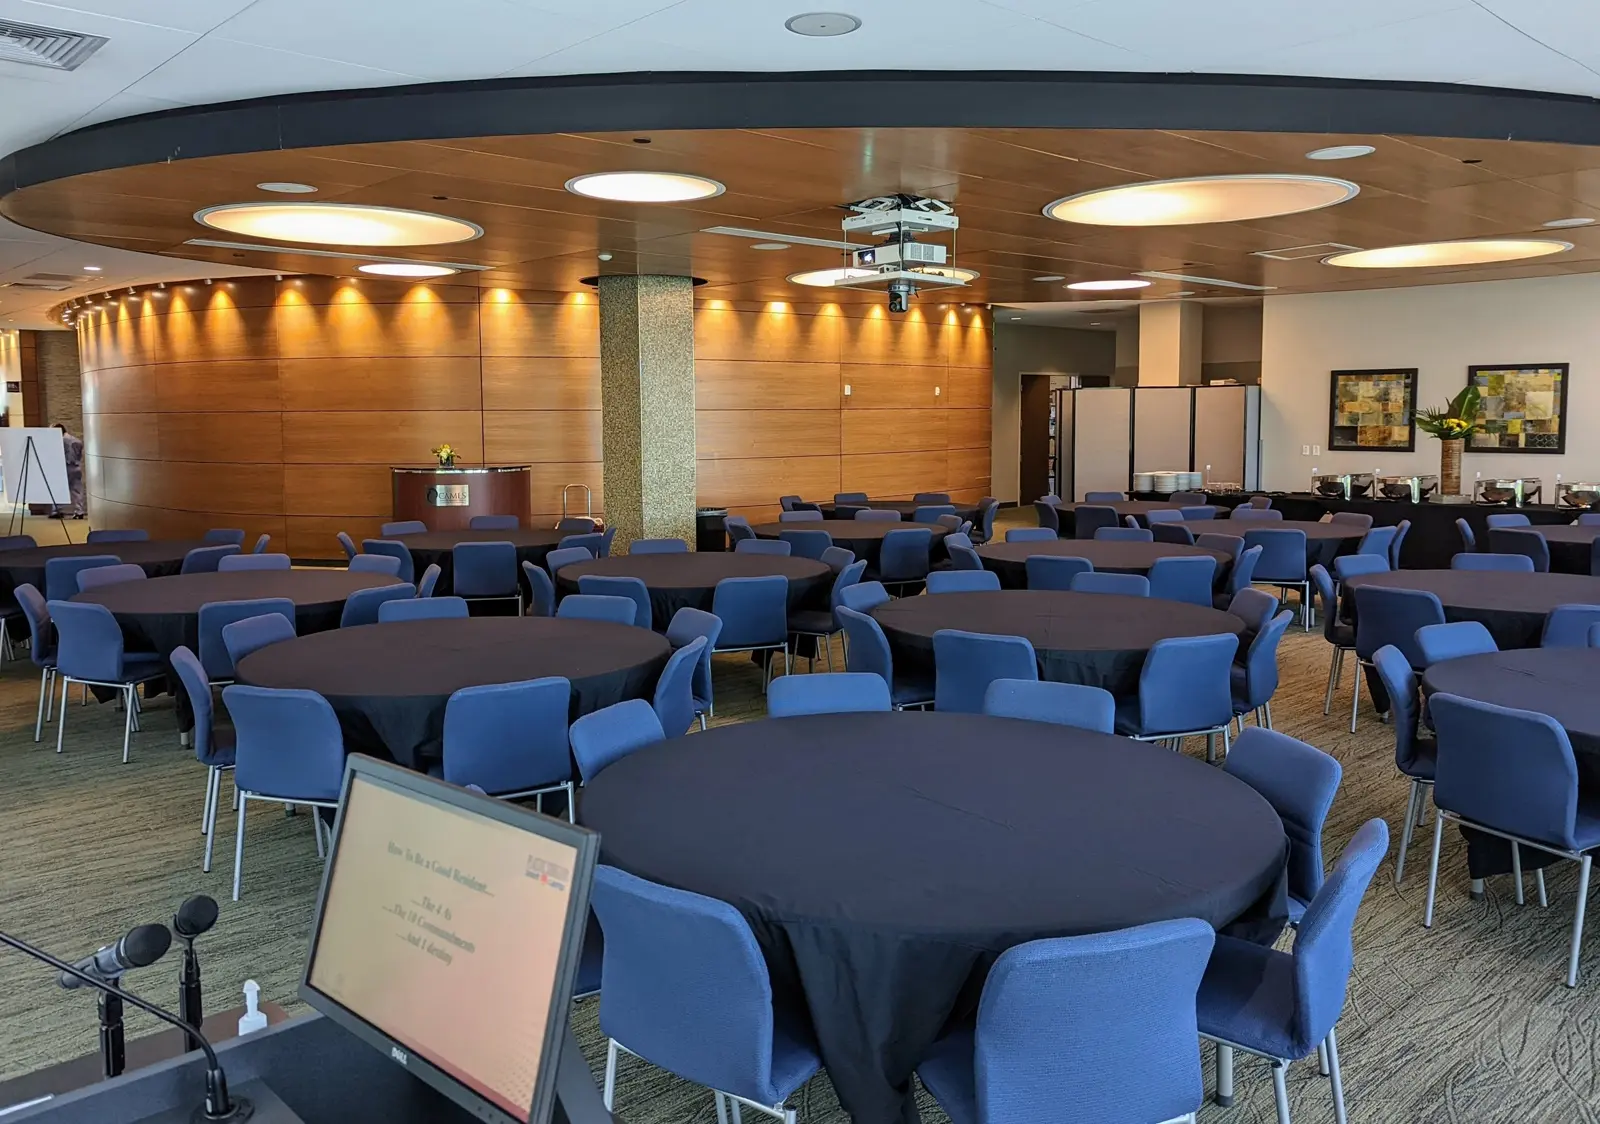 CAMLS A modern conference room with round tables covered in black tablecloths surrounded by blue chairs. In the background, there is a wooden wall with indirect lighting and a small reception desk. To the right, a buffet table is set up with refreshments.